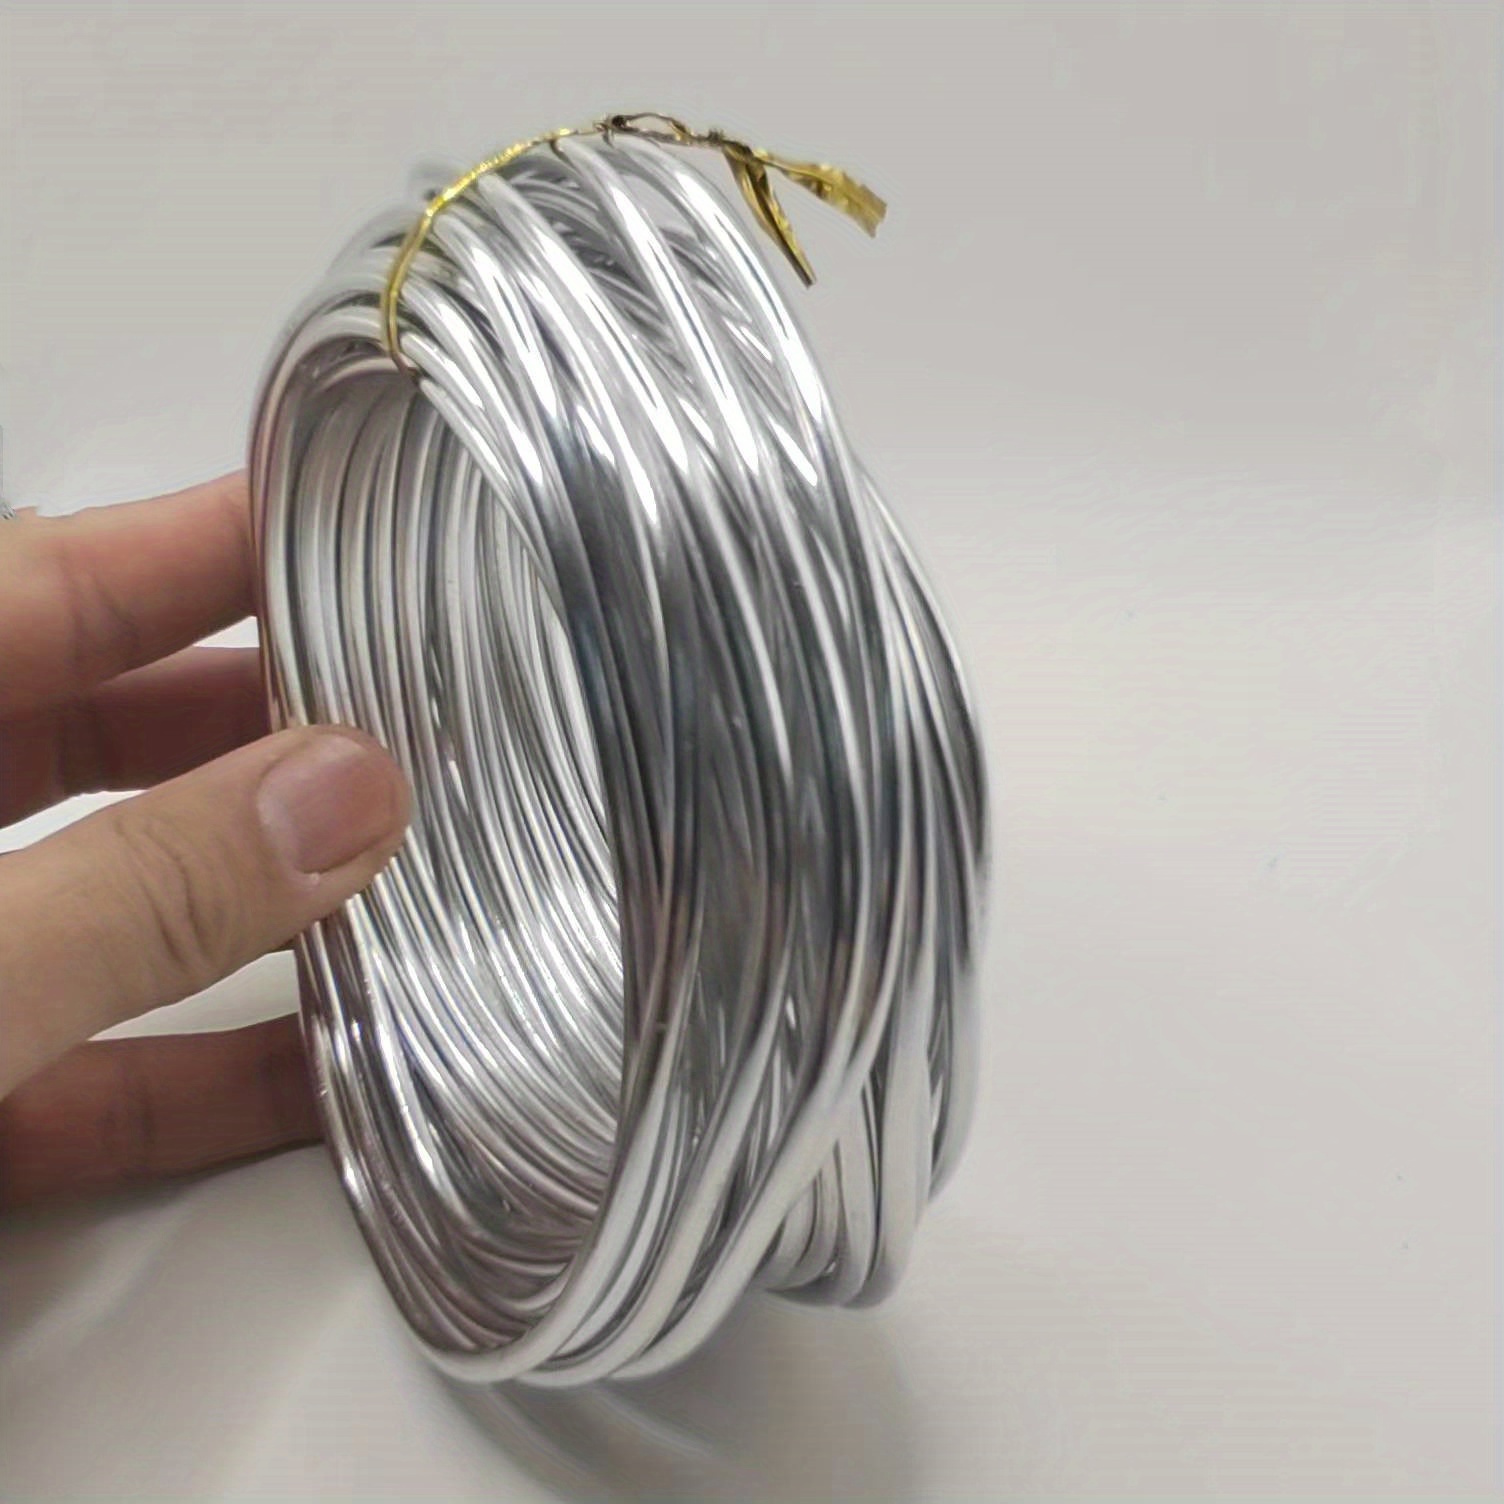 BUZIFU 1 Roll 32.8 Feet（3 mm）Aluminum Craft Wire Silver Aluminum Wire  Bendable Metal Sculpting Wire Artistic Beading Wire for Jewelry Making  Crafts